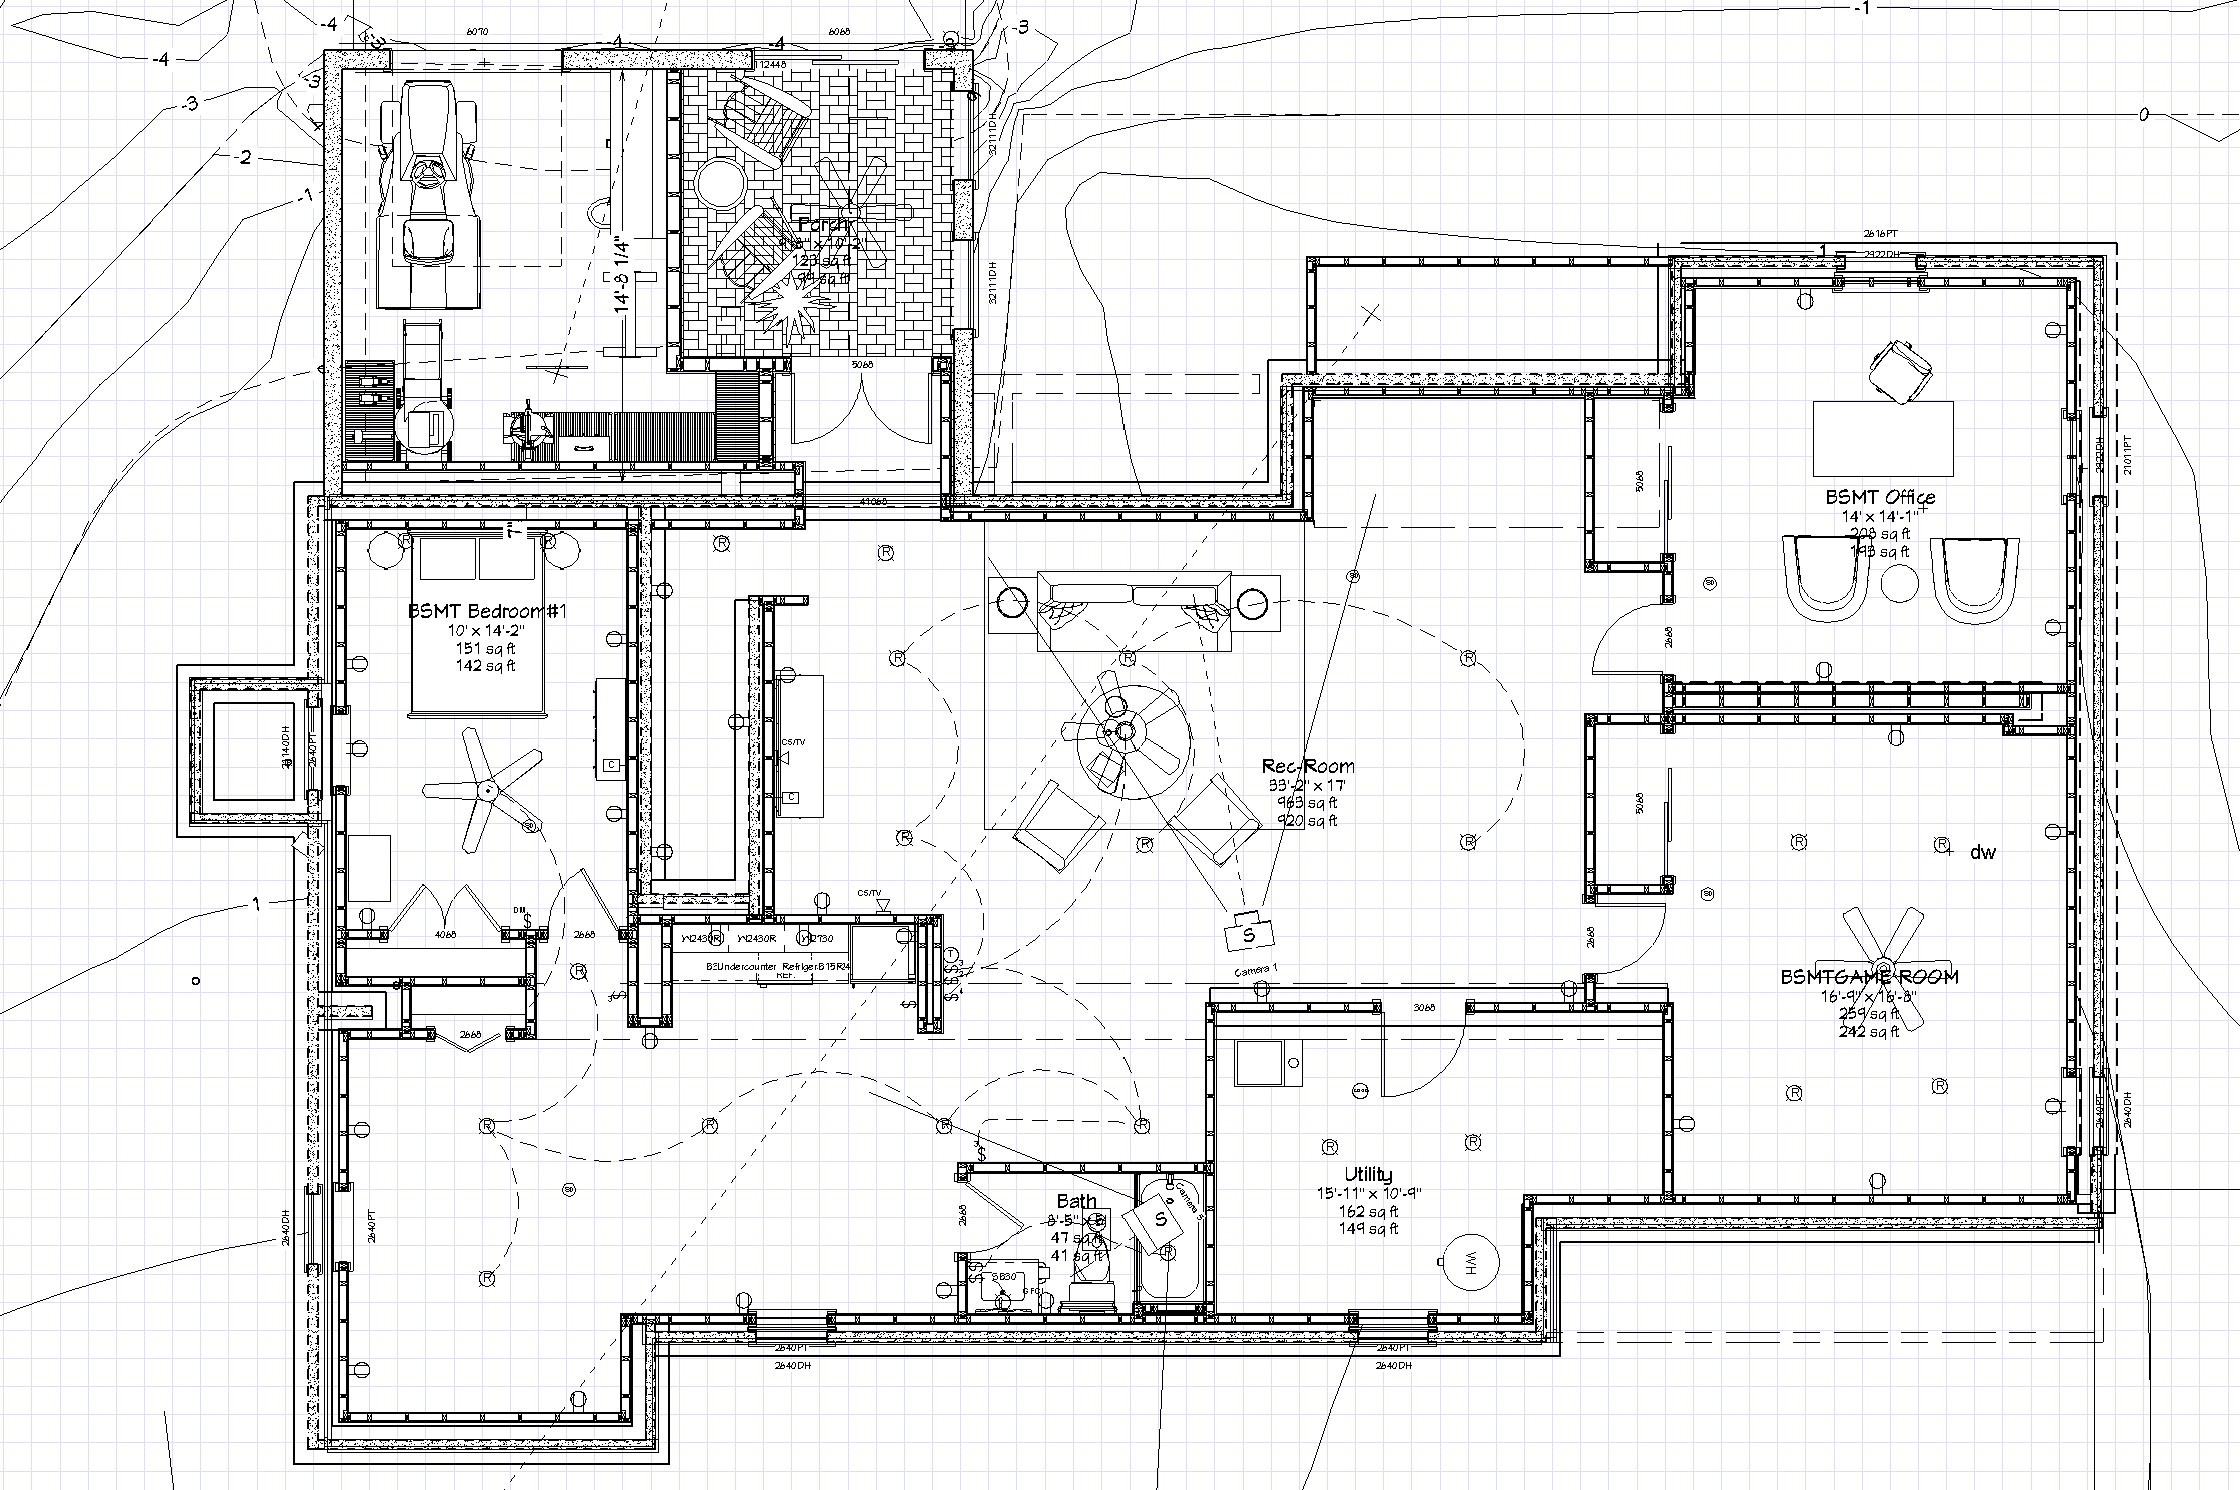 Basement design with 2 story addition